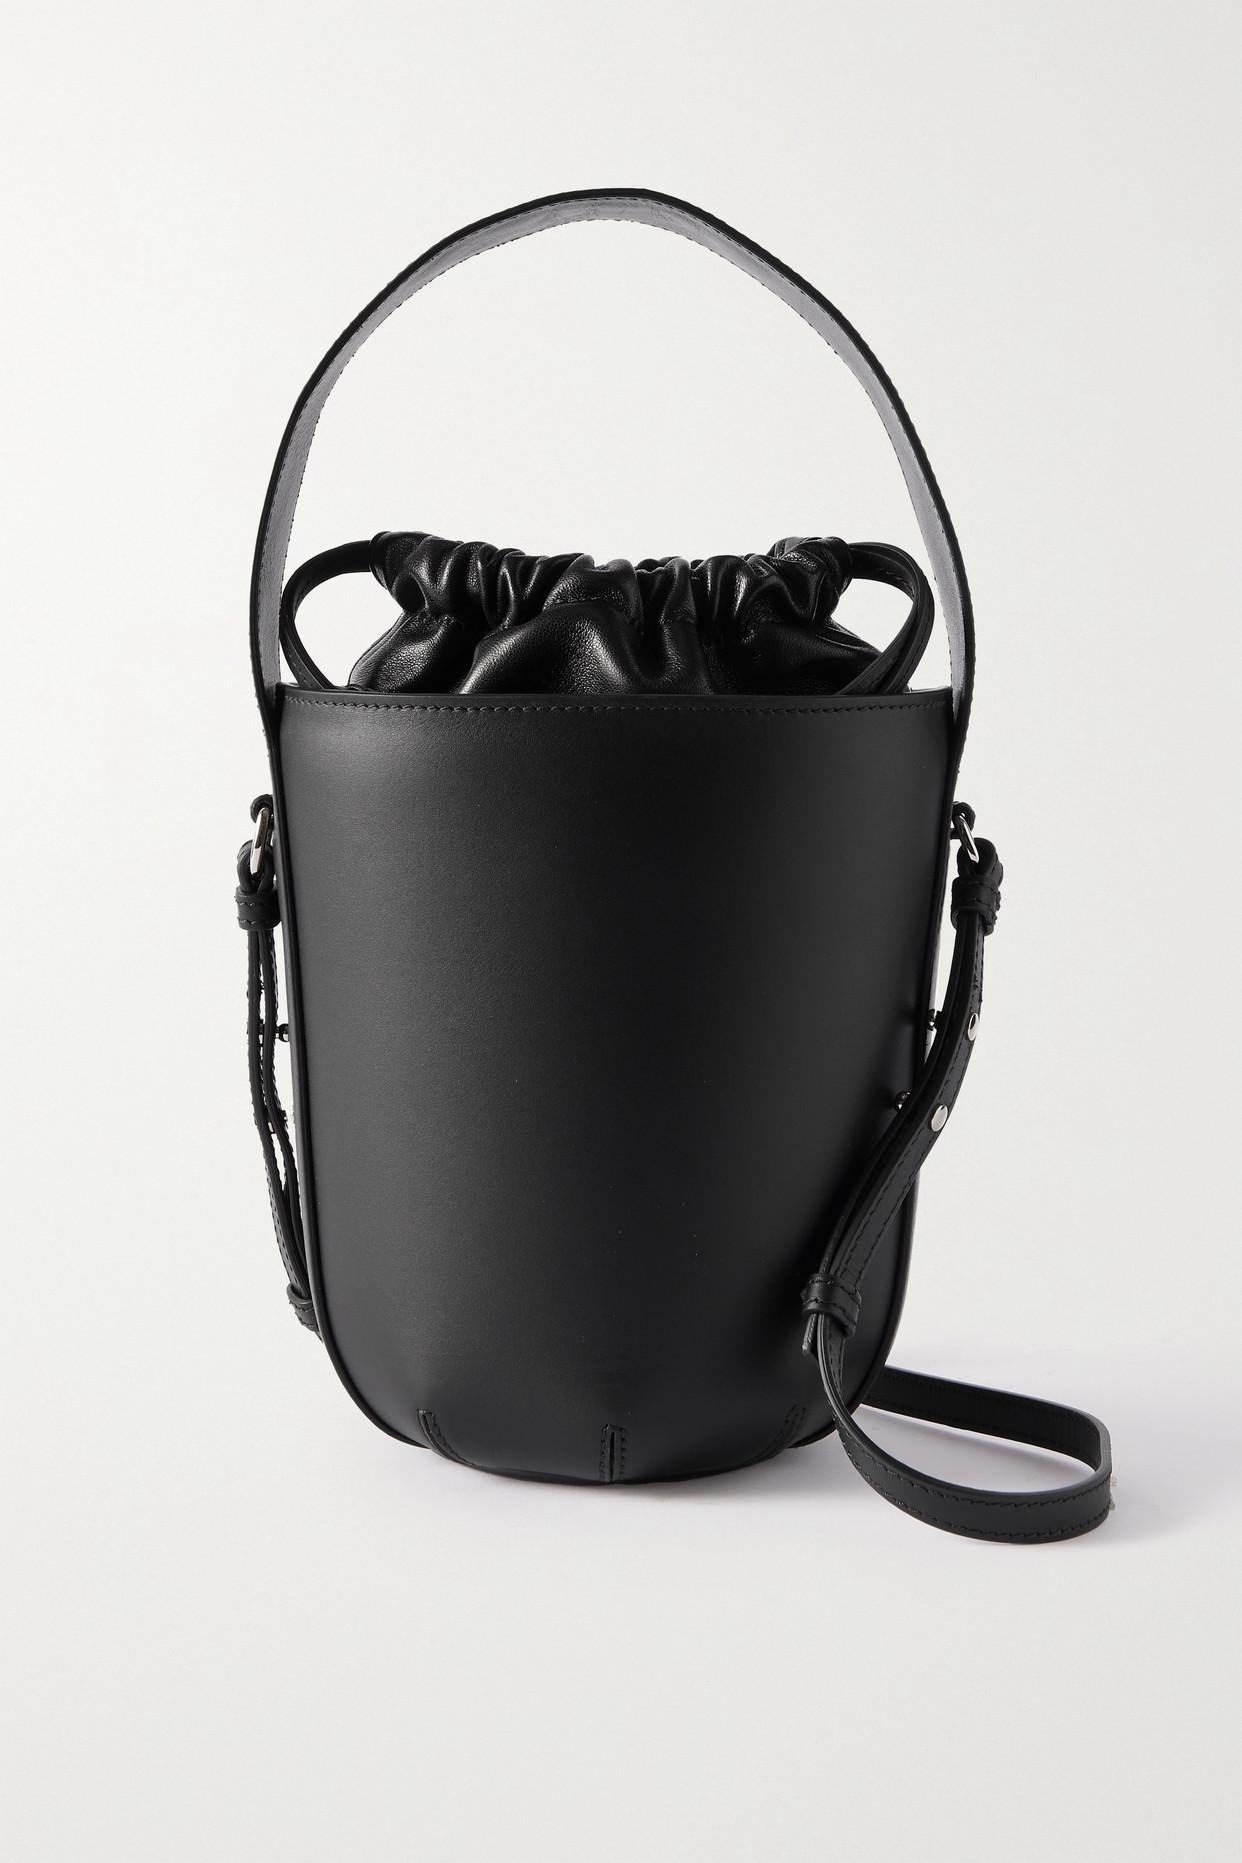 Chloé Sense Embroidered Leather Bucket Bag in Black | Lyst